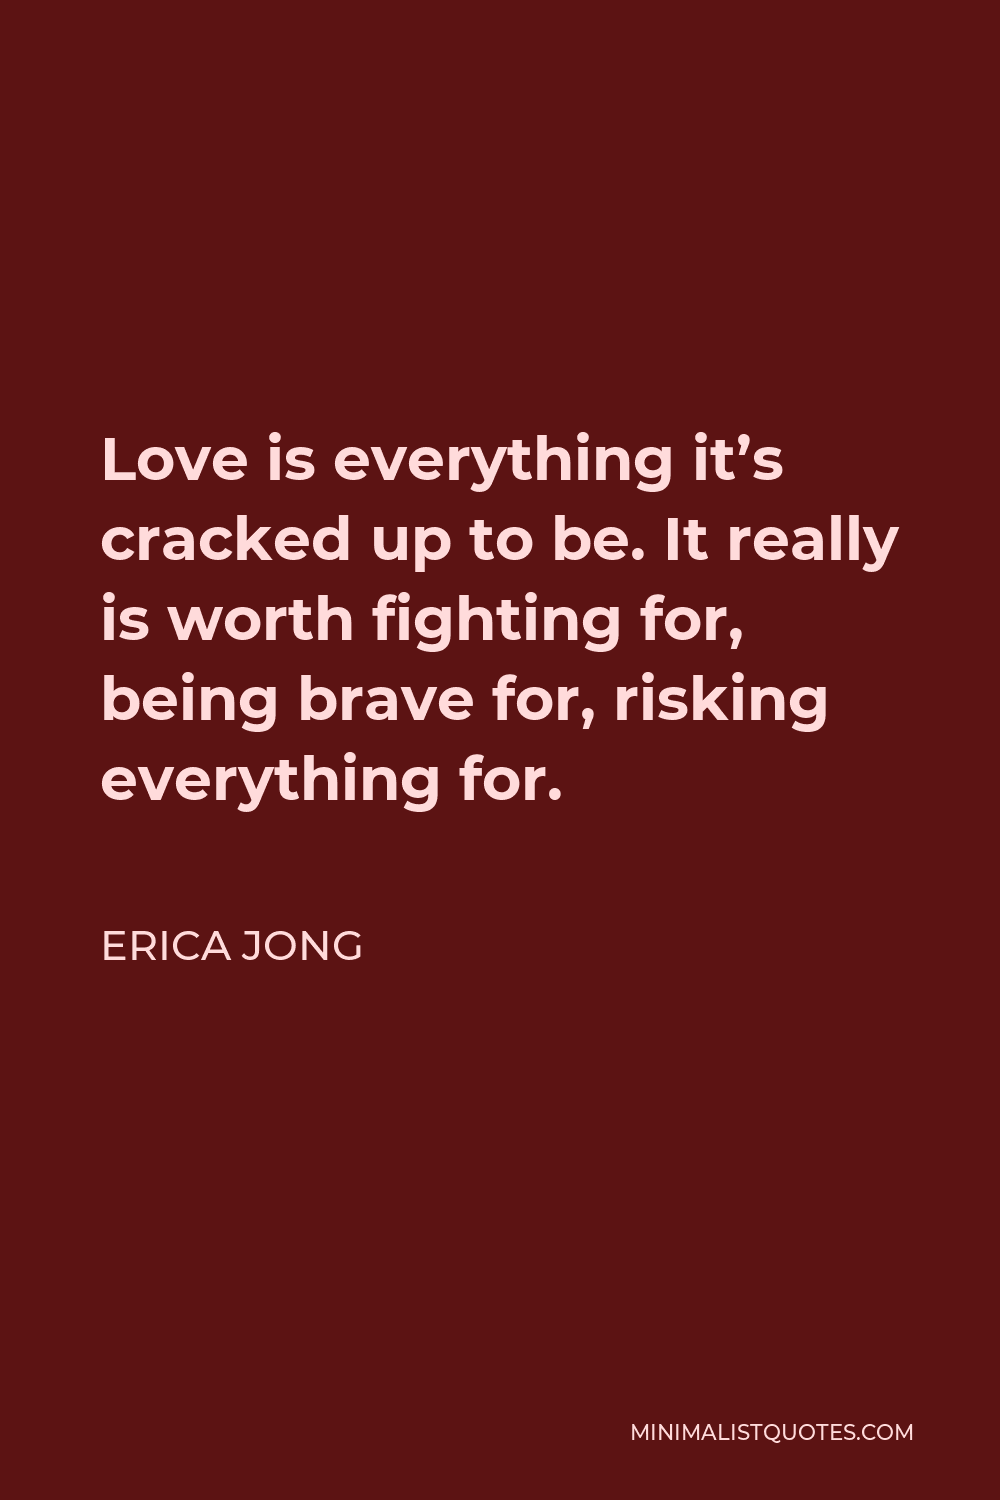 Erica Jong Quote - Love is everything it’s cracked up to be. It really is worth fighting for, being brave for, risking everything for.